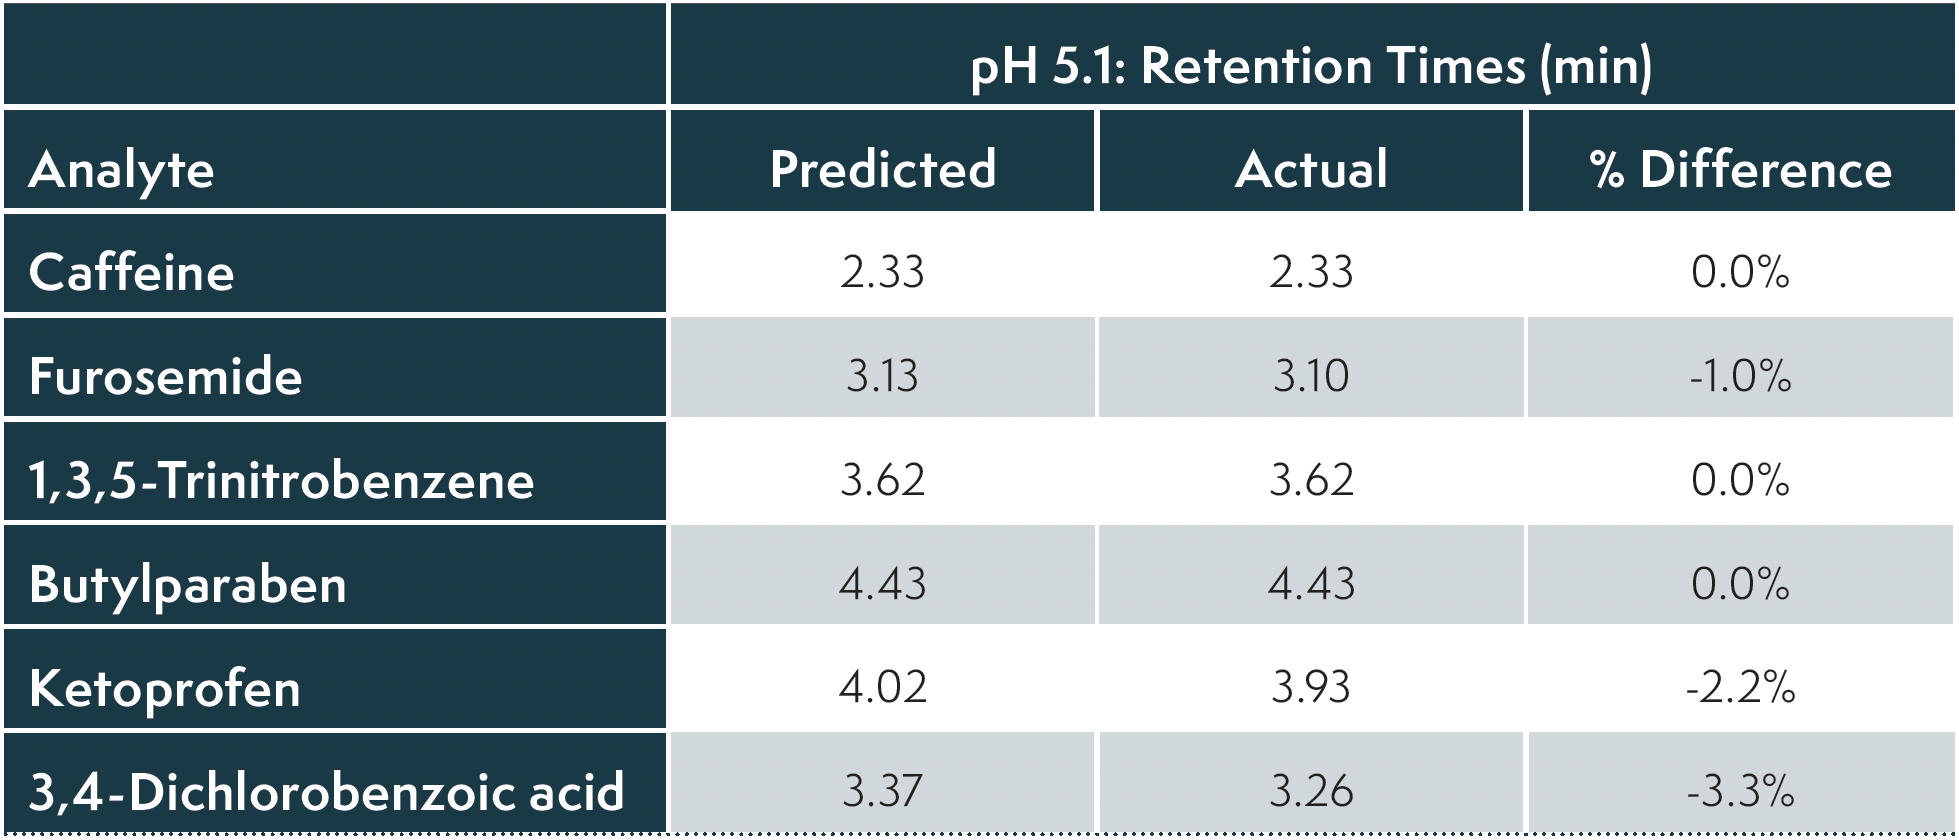 TABLE III: Comparison of the predicted retention times (pH 5.1) from the simulated separation generated from a retention modelling experiment and the experimentally obtained retention times.